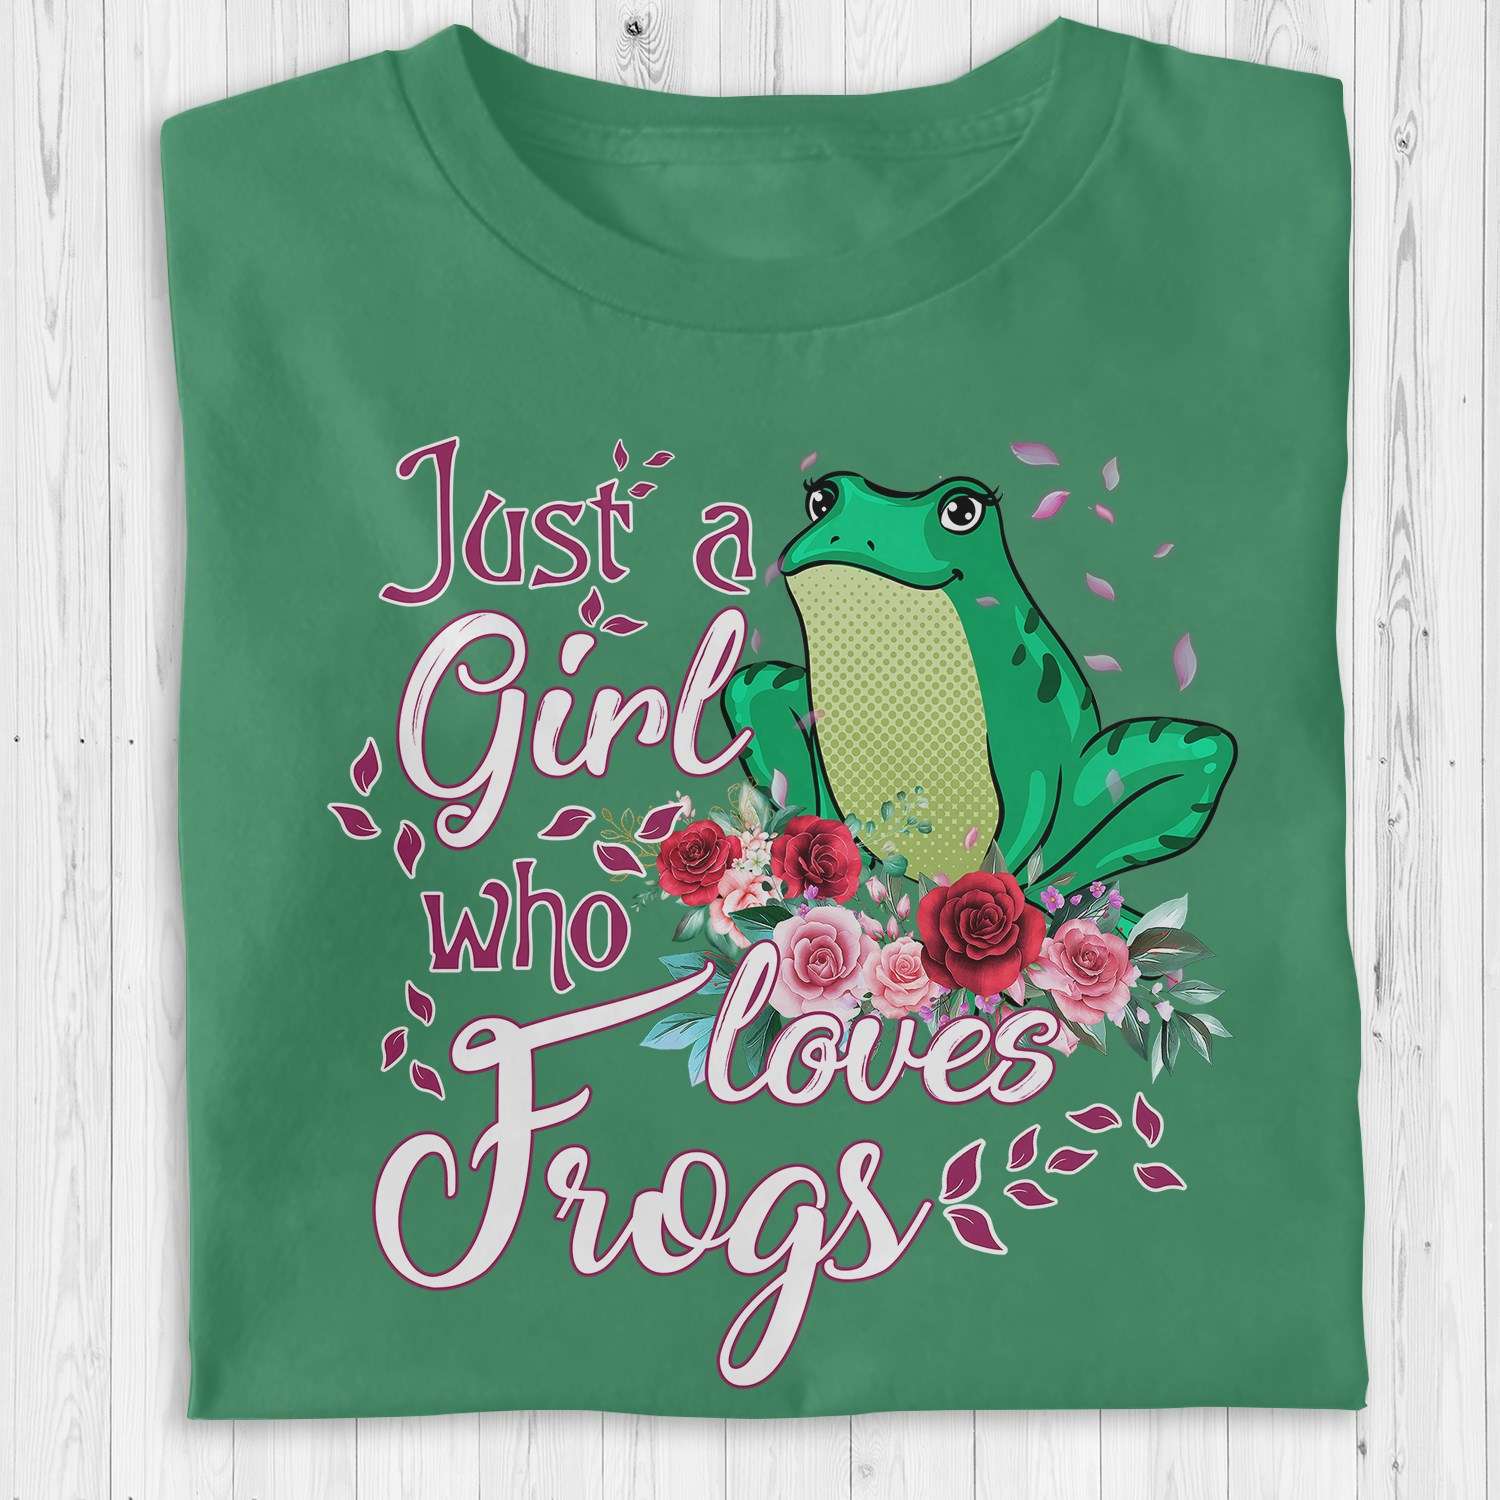 Just a girl who loves frogs - Frog girl